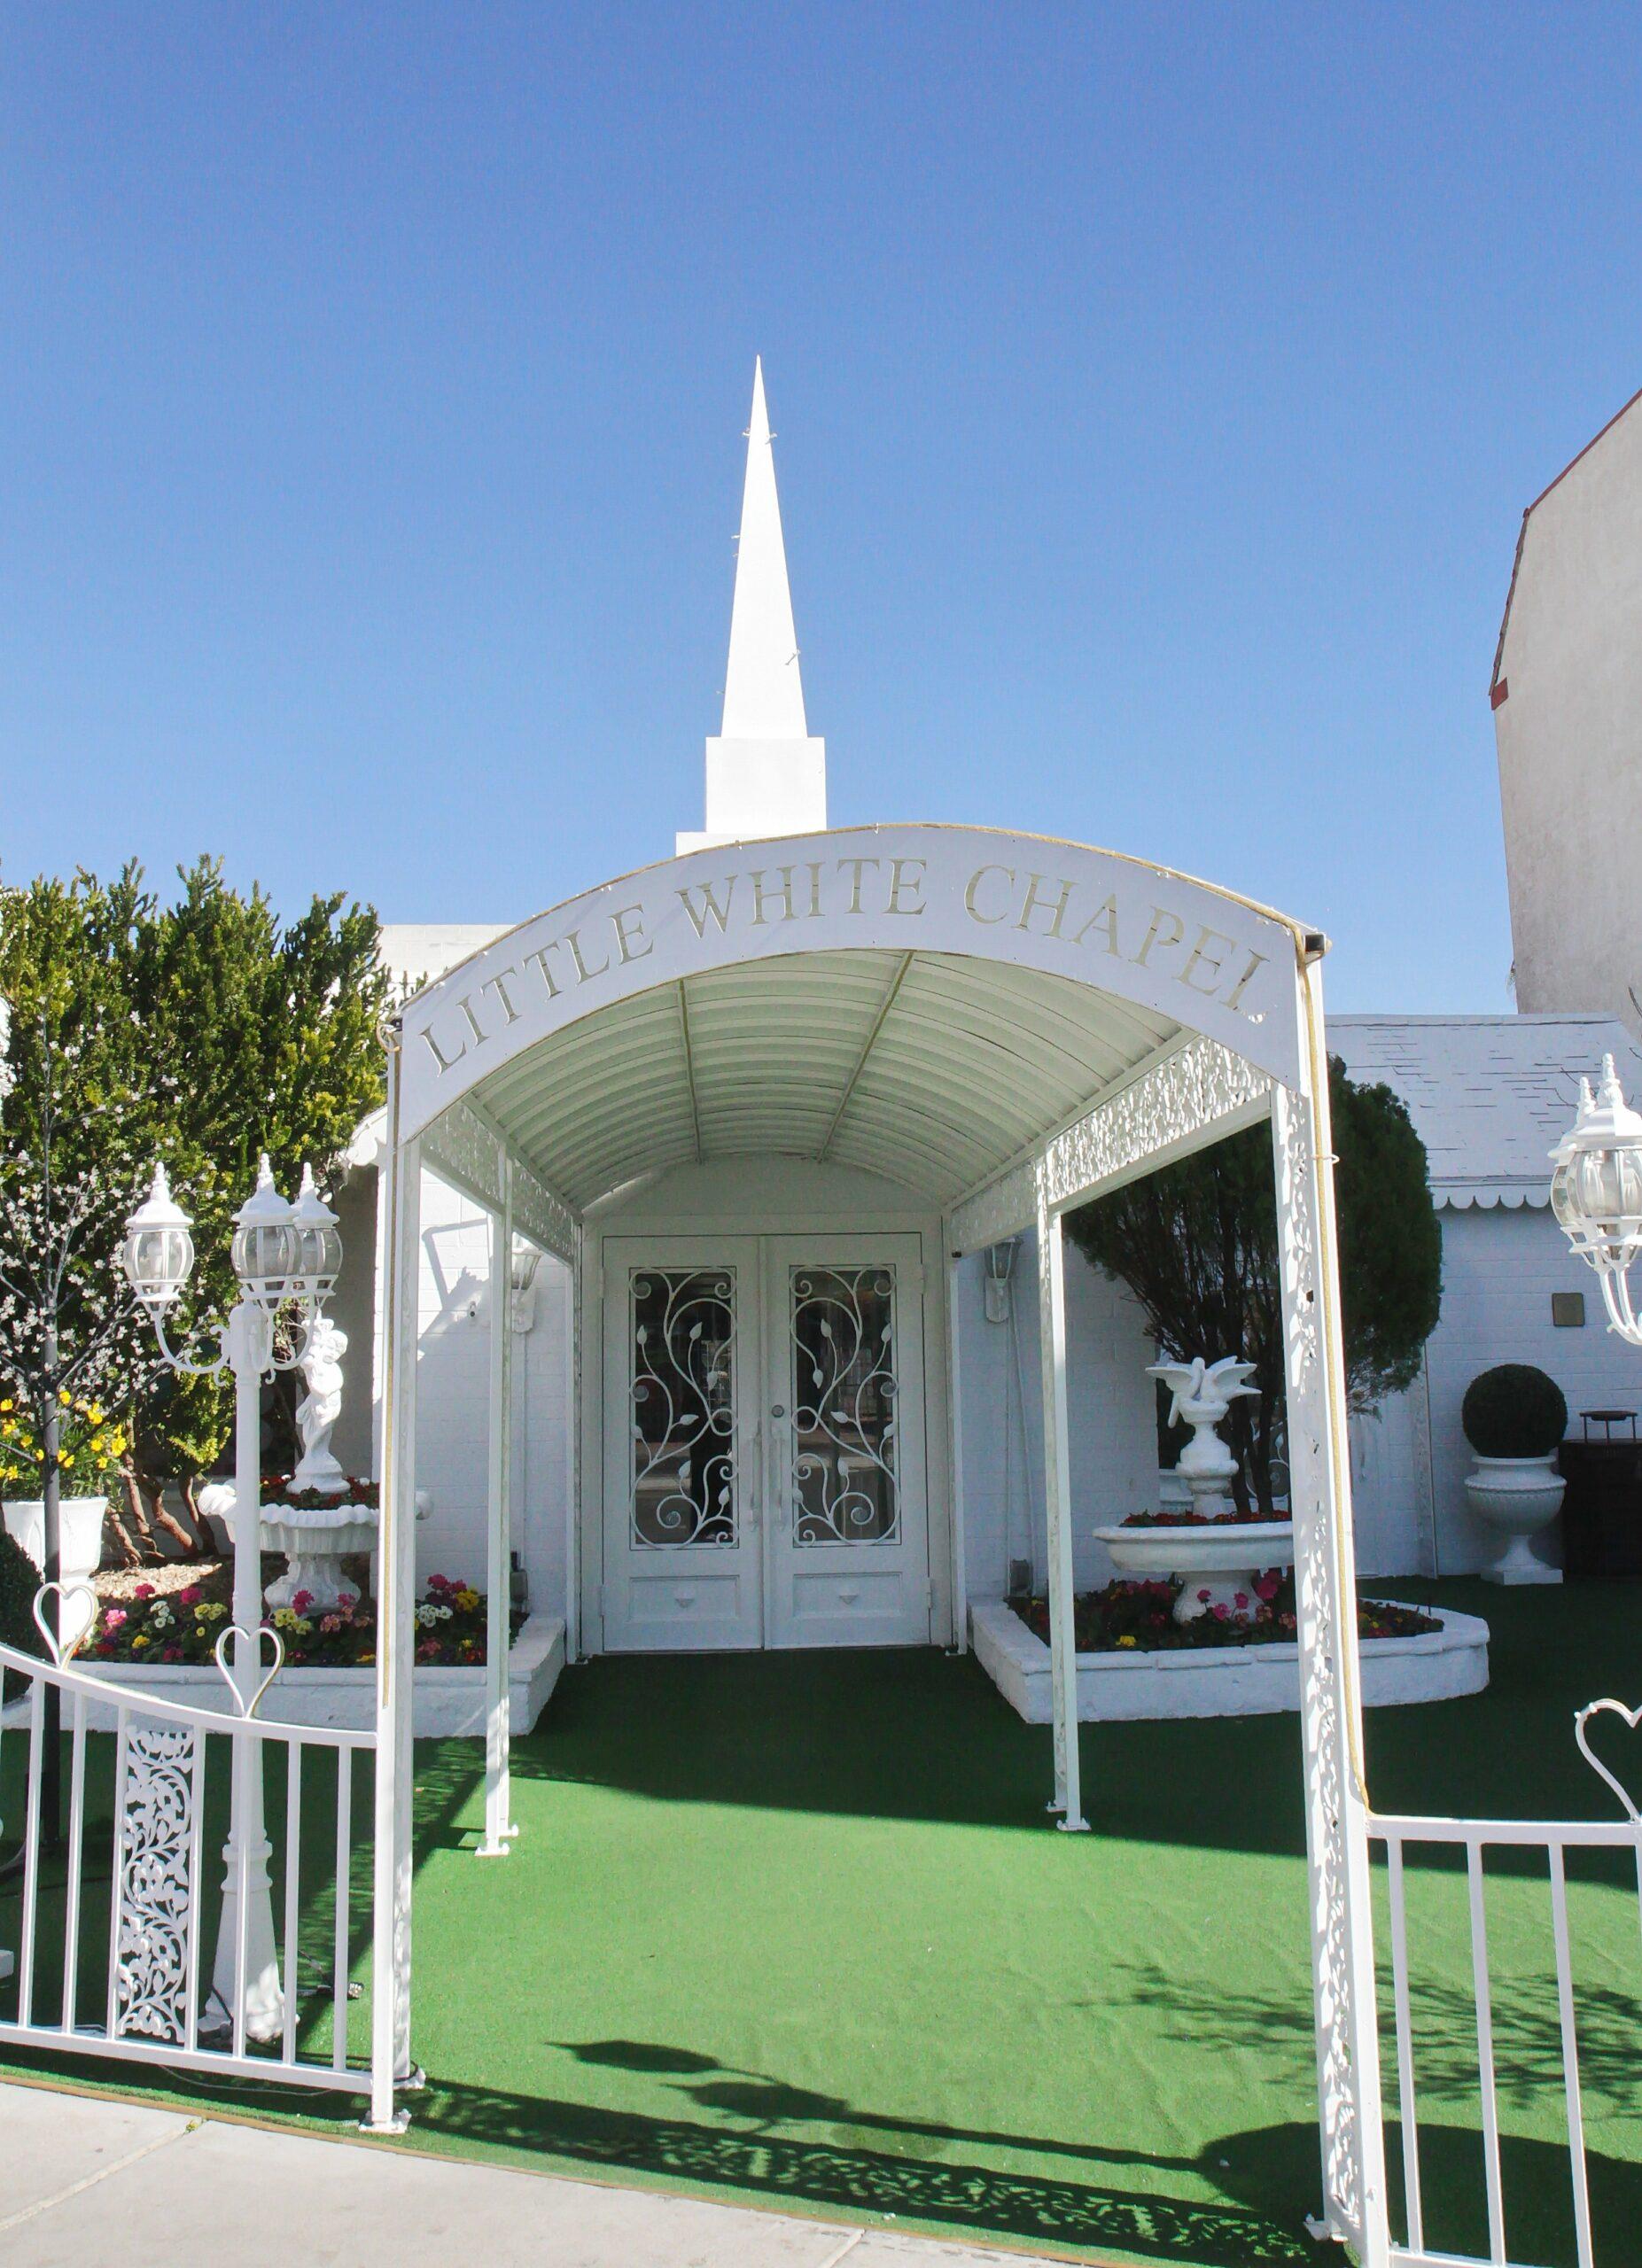 The Las Vegas landmark where numerous celebrities have tied the knot is up for sale for the first time in 68 years. Now on the market for $12 million, A Little White Chapel is where Britney Spears embarked on her infamous 55-hour marriage to childhood friend Jason Alexander, and where Judy Garland and her fourth husband, Mark Herron; Michael Jordan and Juanita Vanoy; Frank Sinatra and Mia Farrow; Bruce Willis and Demi Moore; and more famous couples all said, "I do.". 17 Apr 2019 Pictured: Little White Chapel. Photo credit: Mike Stotts / MEGA TheMegaAgency.com +1 888 505 6342 (Mega Agency TagID: MEGA401799_008.jpg) [Photo via Mega Agency]